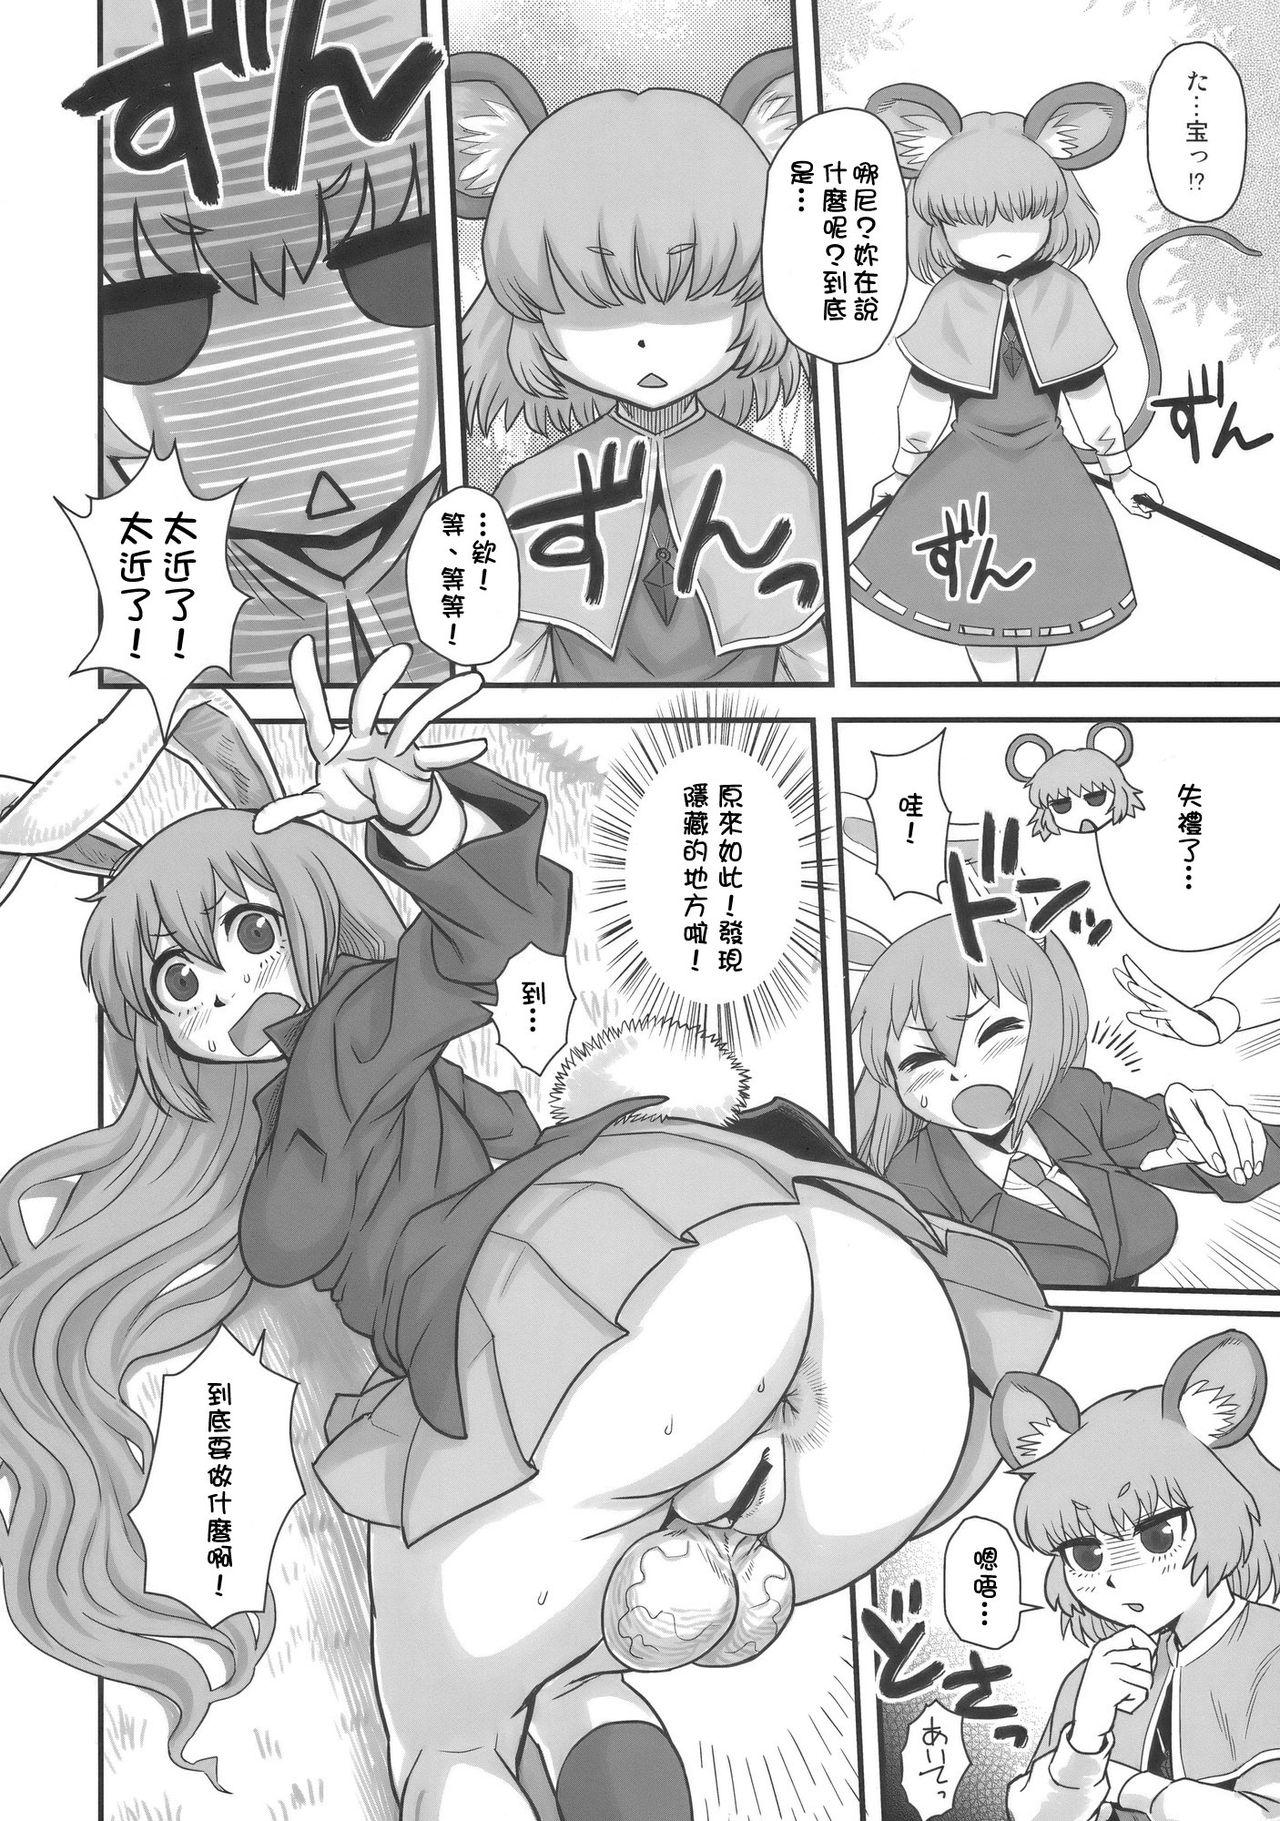 Hot Girl Fuck Lunatic Udon - Touhou project Full Movie - Page 6